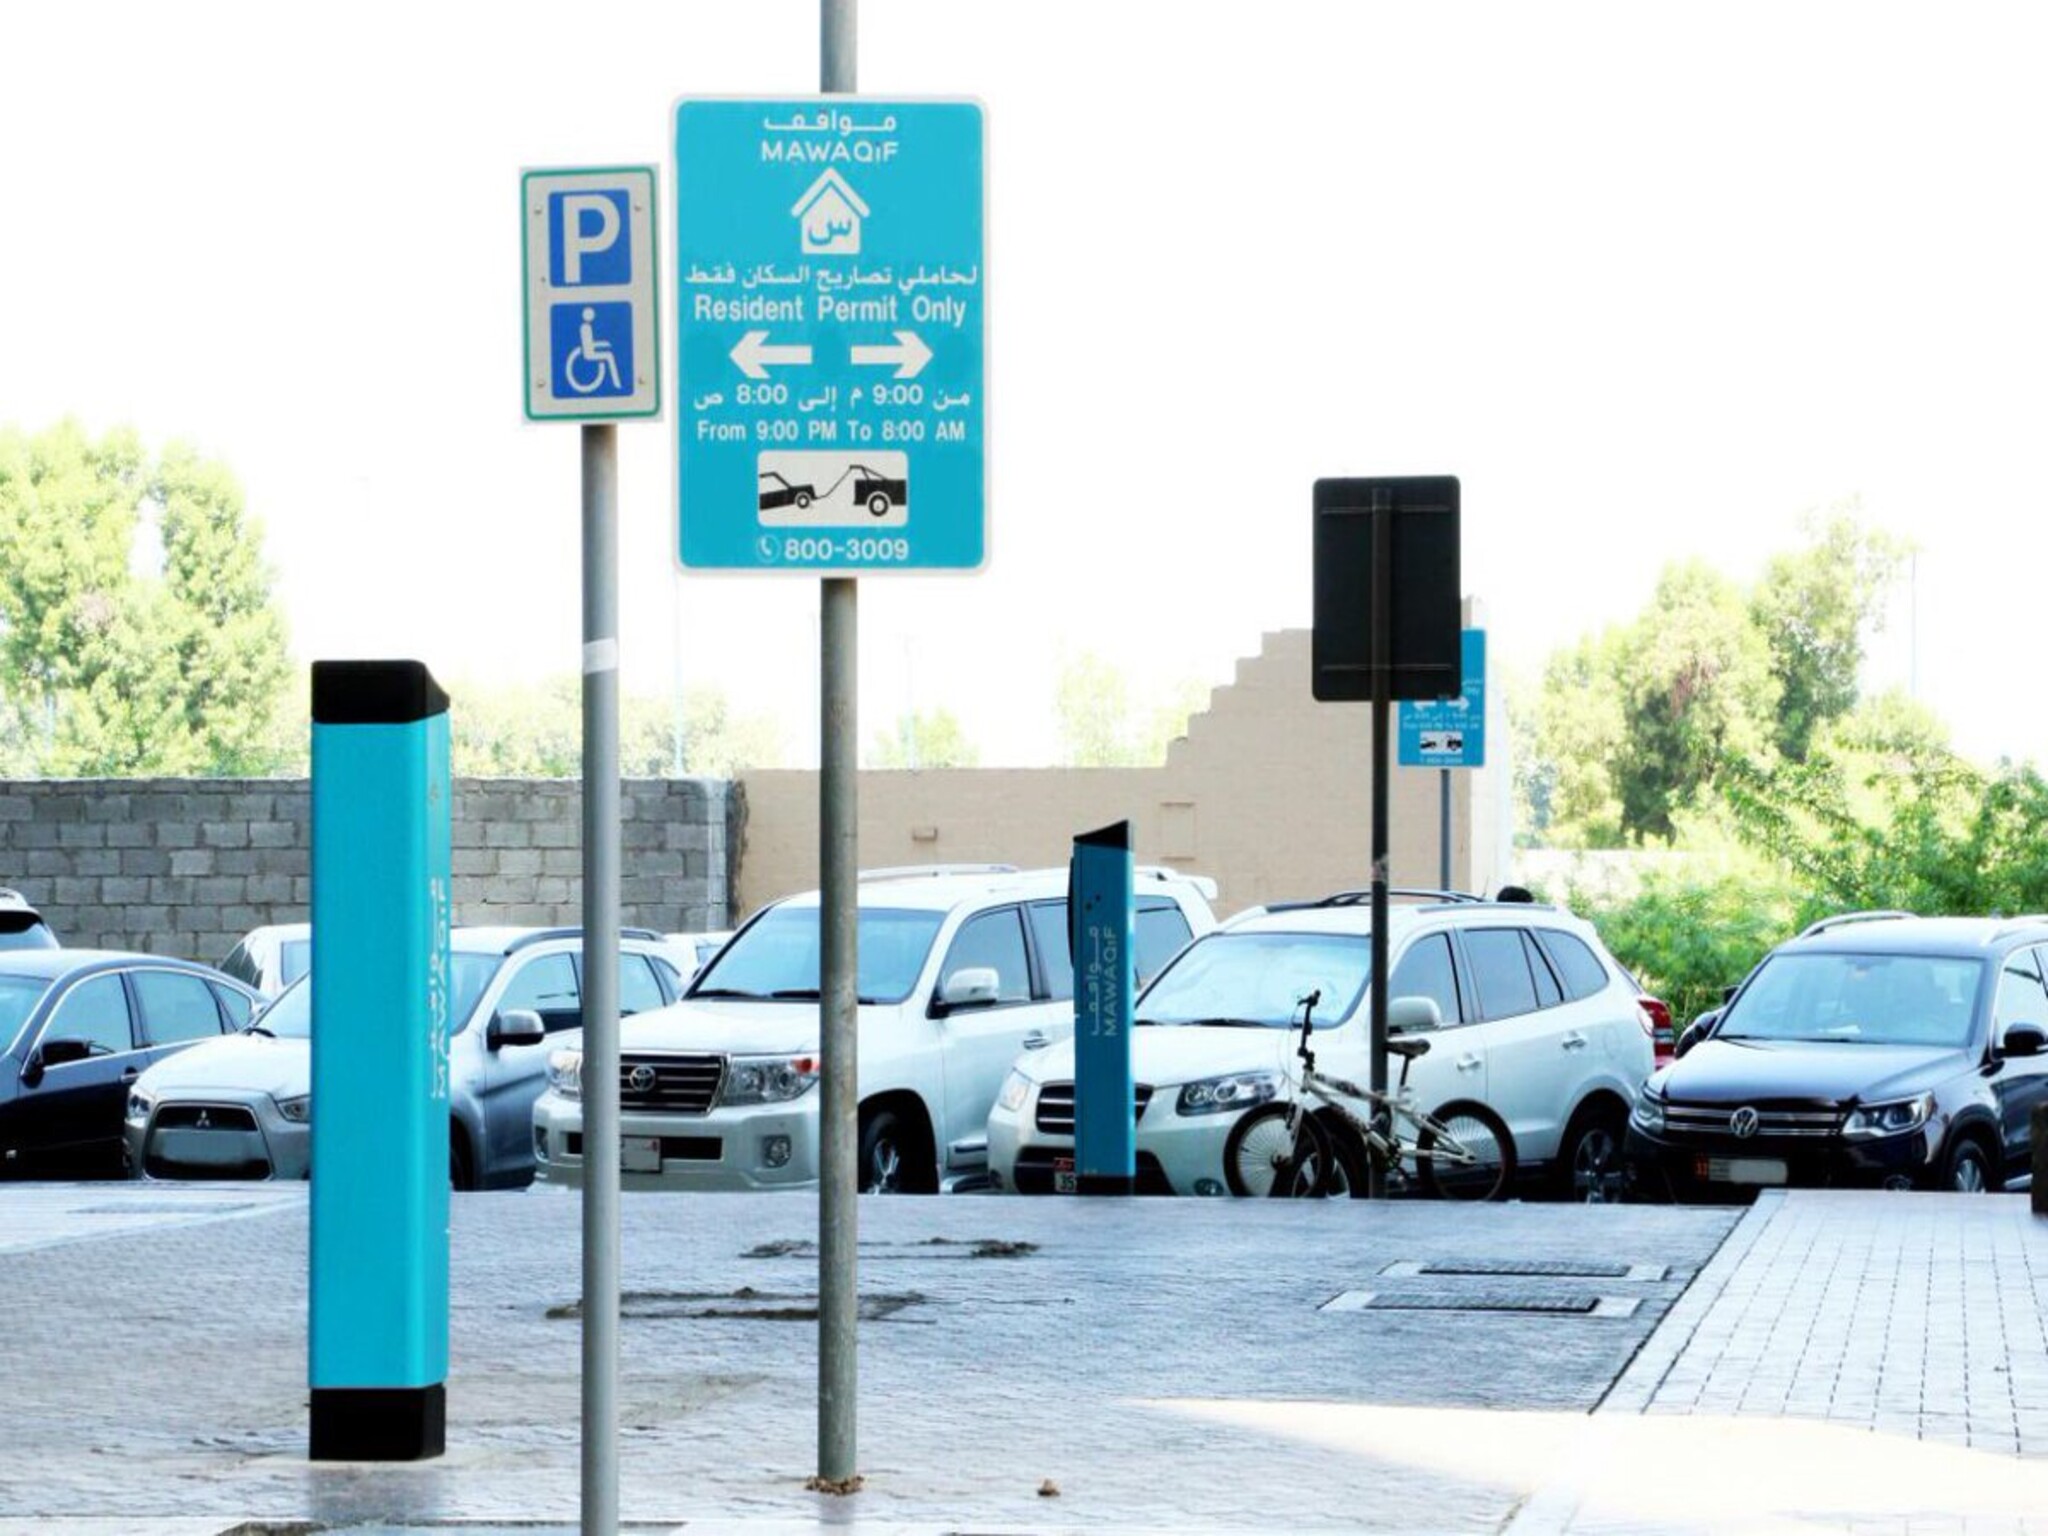 Parking hours in paid parking lots in the UAE during Ramadan